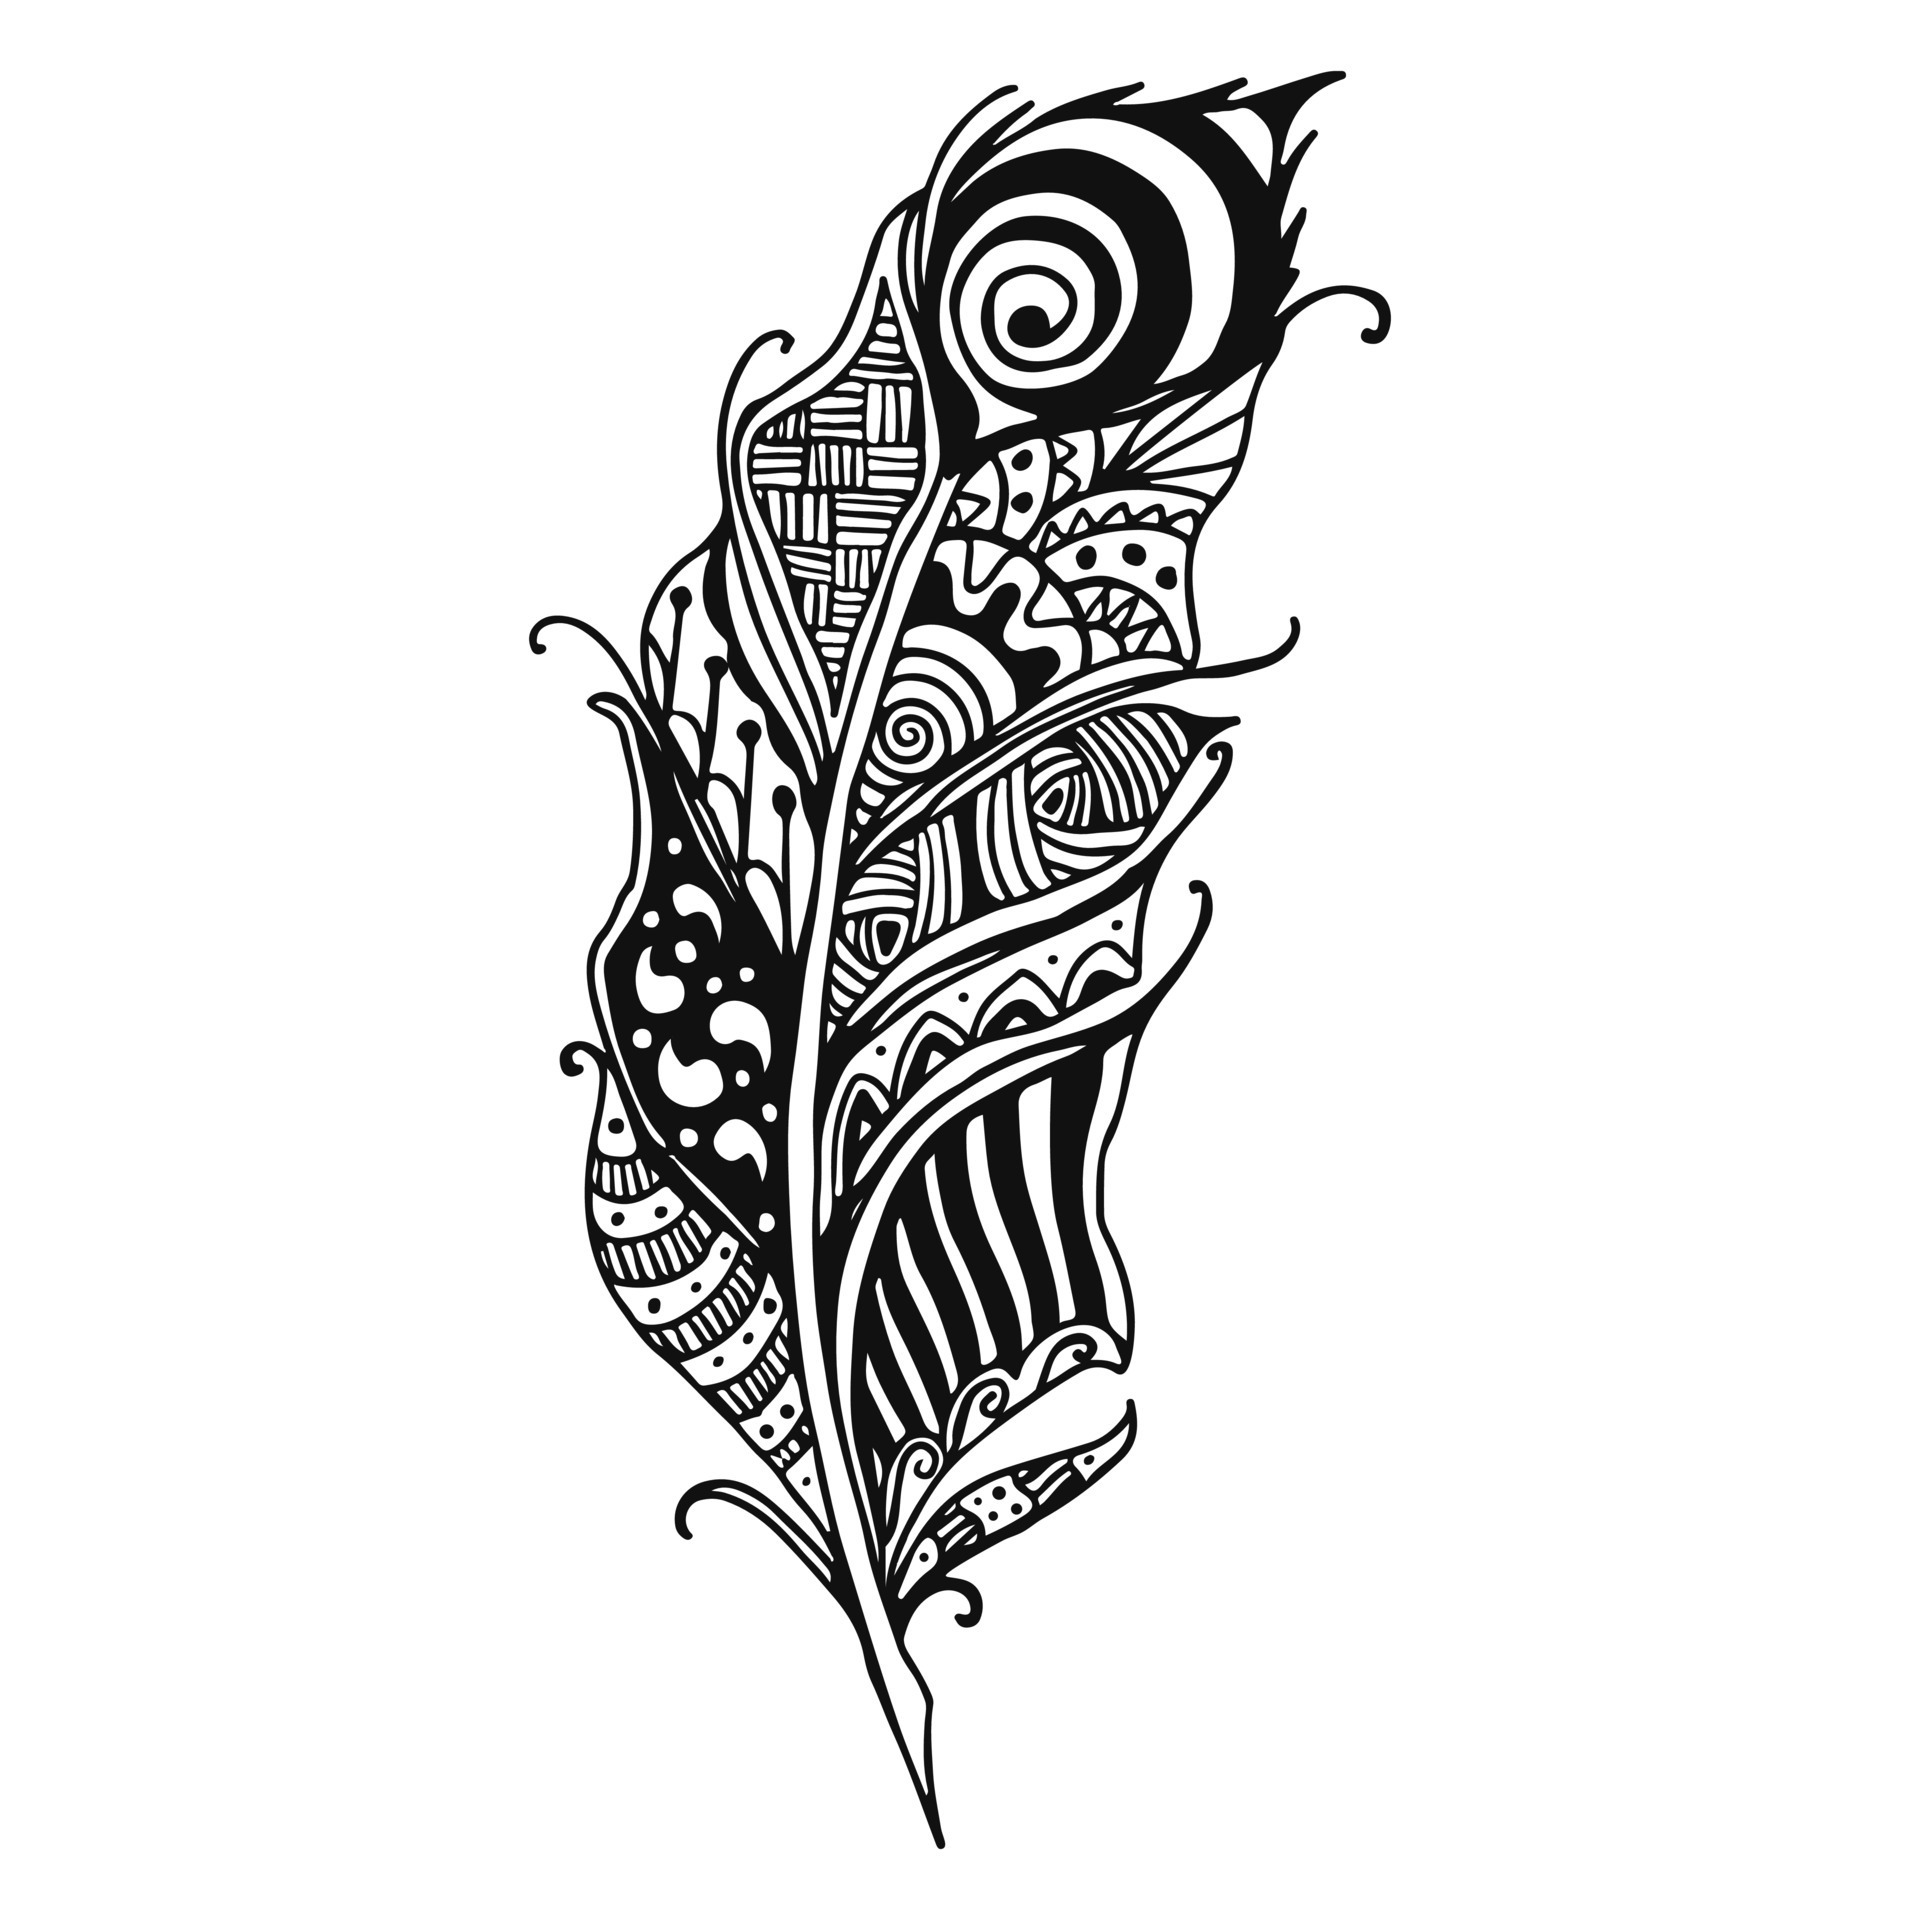 feather ornament vector illustration in black and white colors 16837430 ...